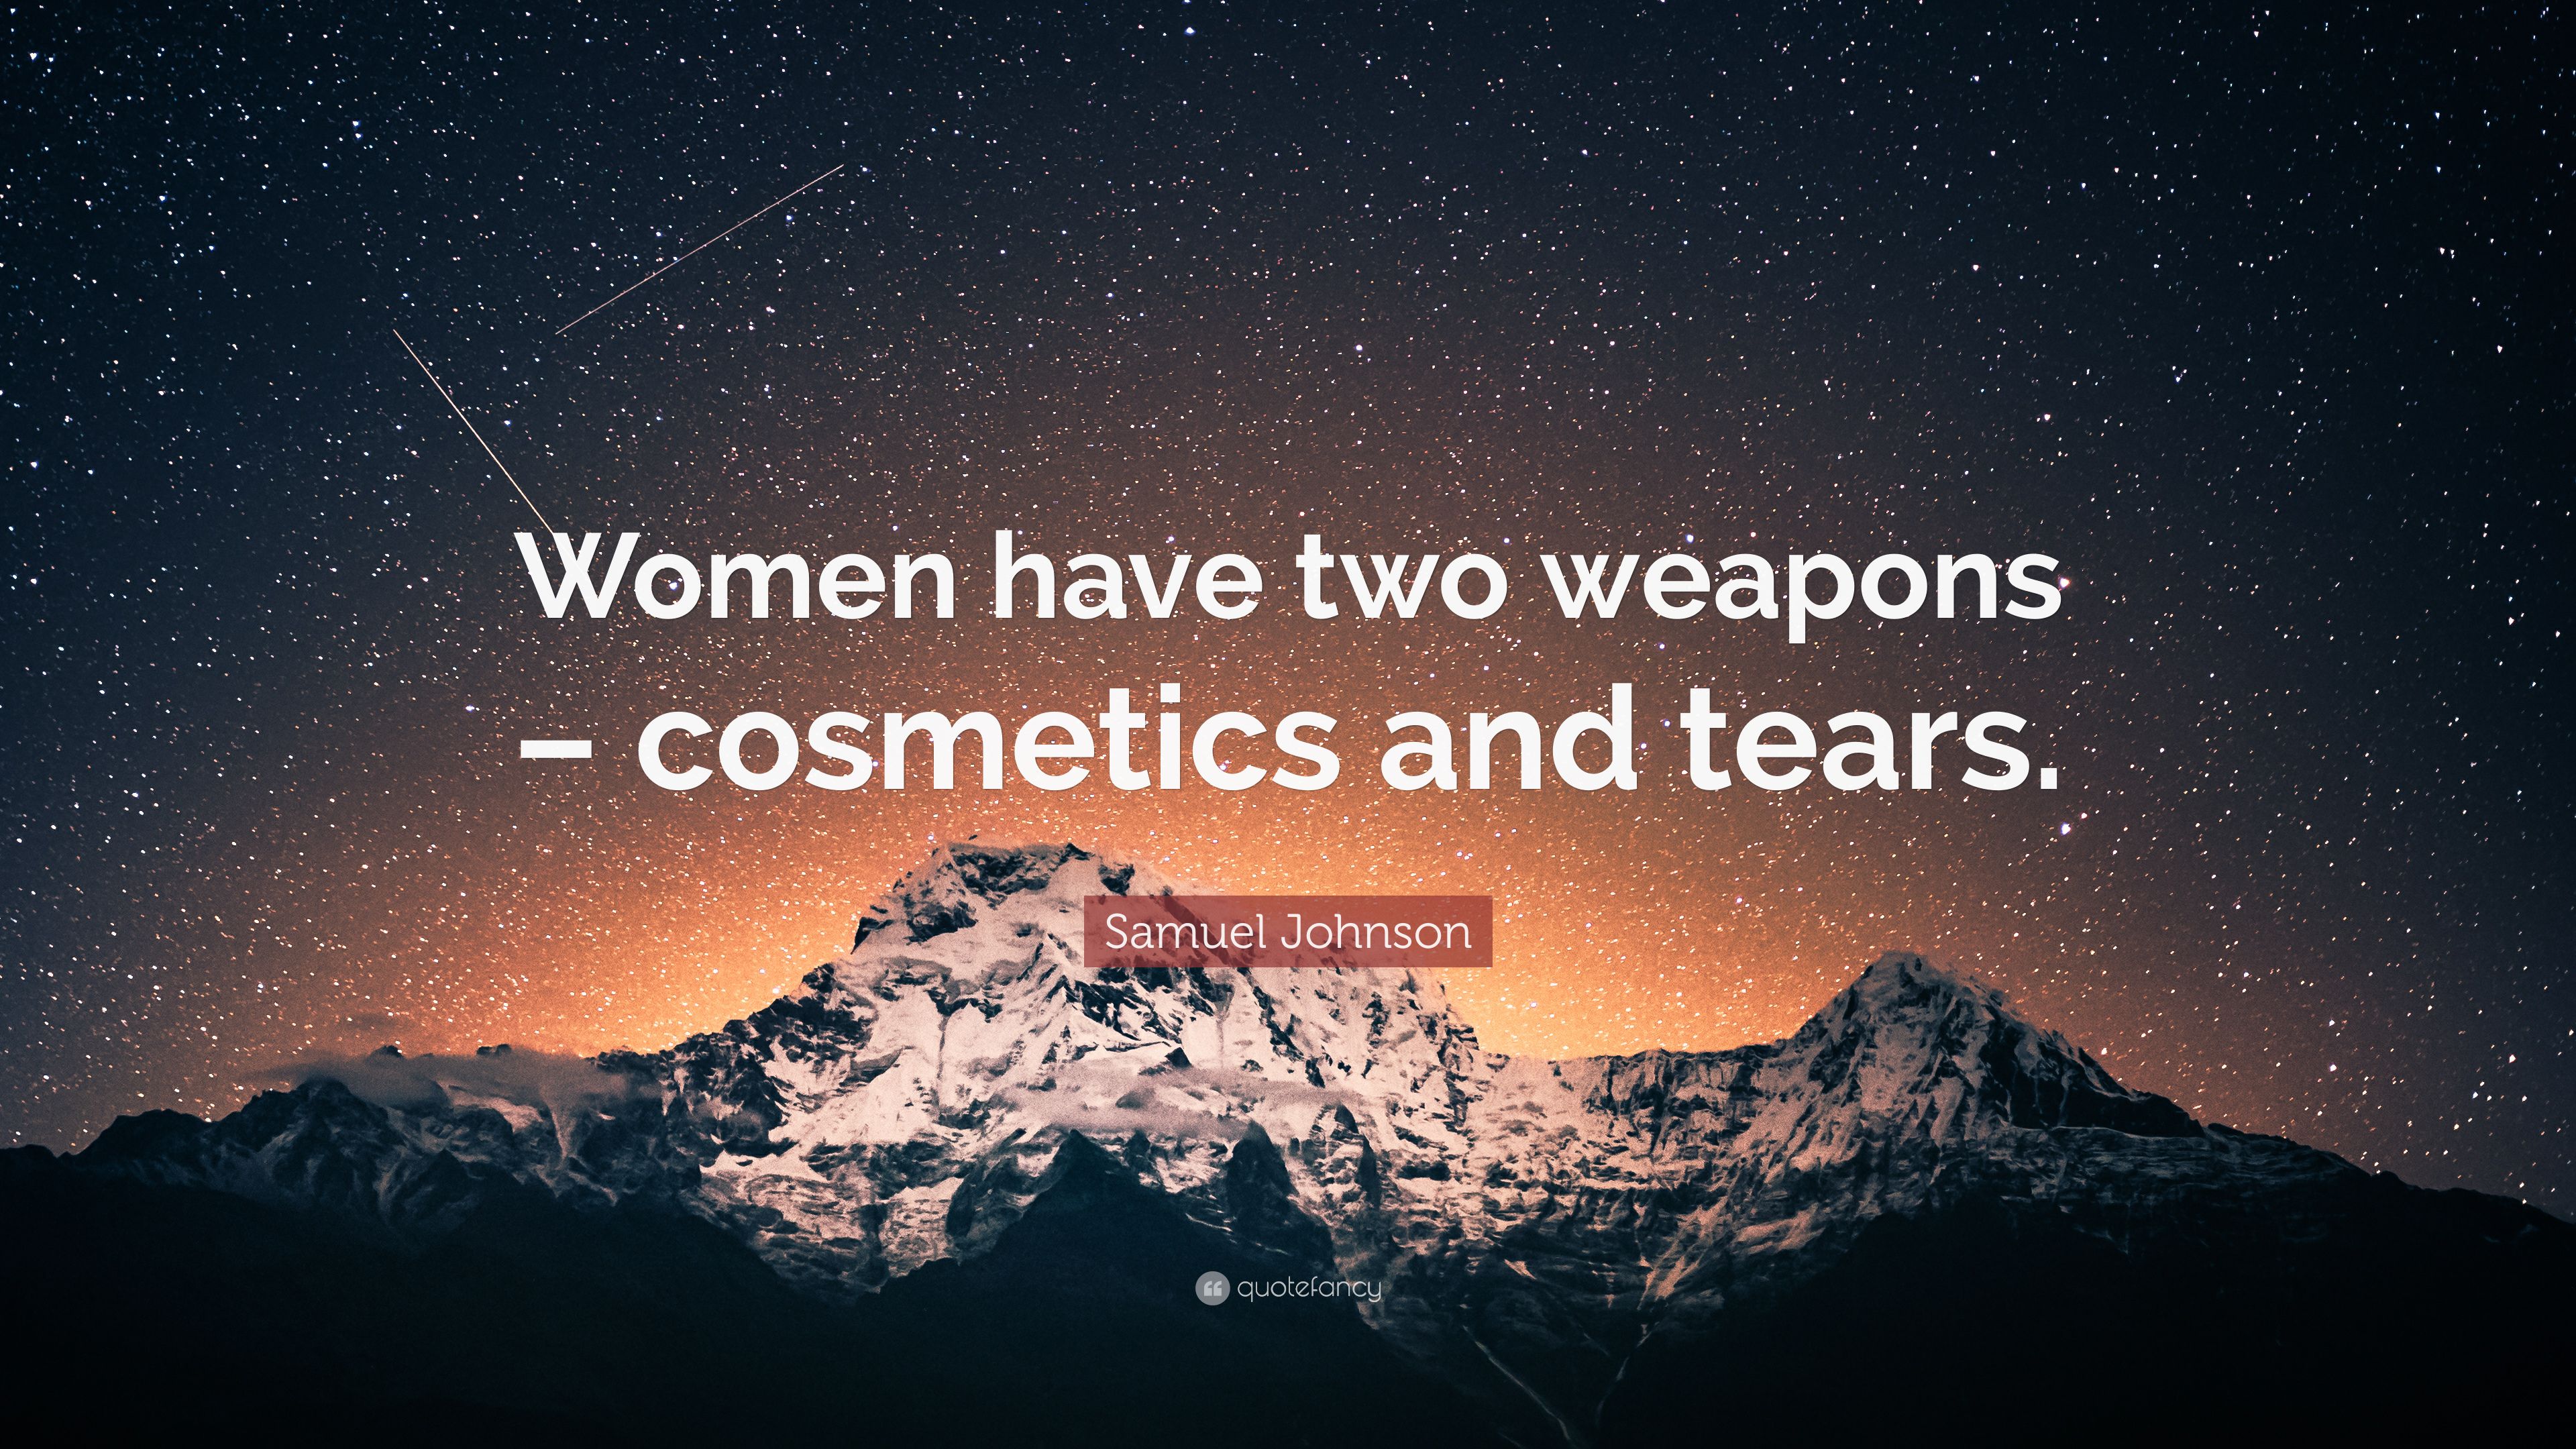 Samuel Johnson Quote: “Women have two weapons